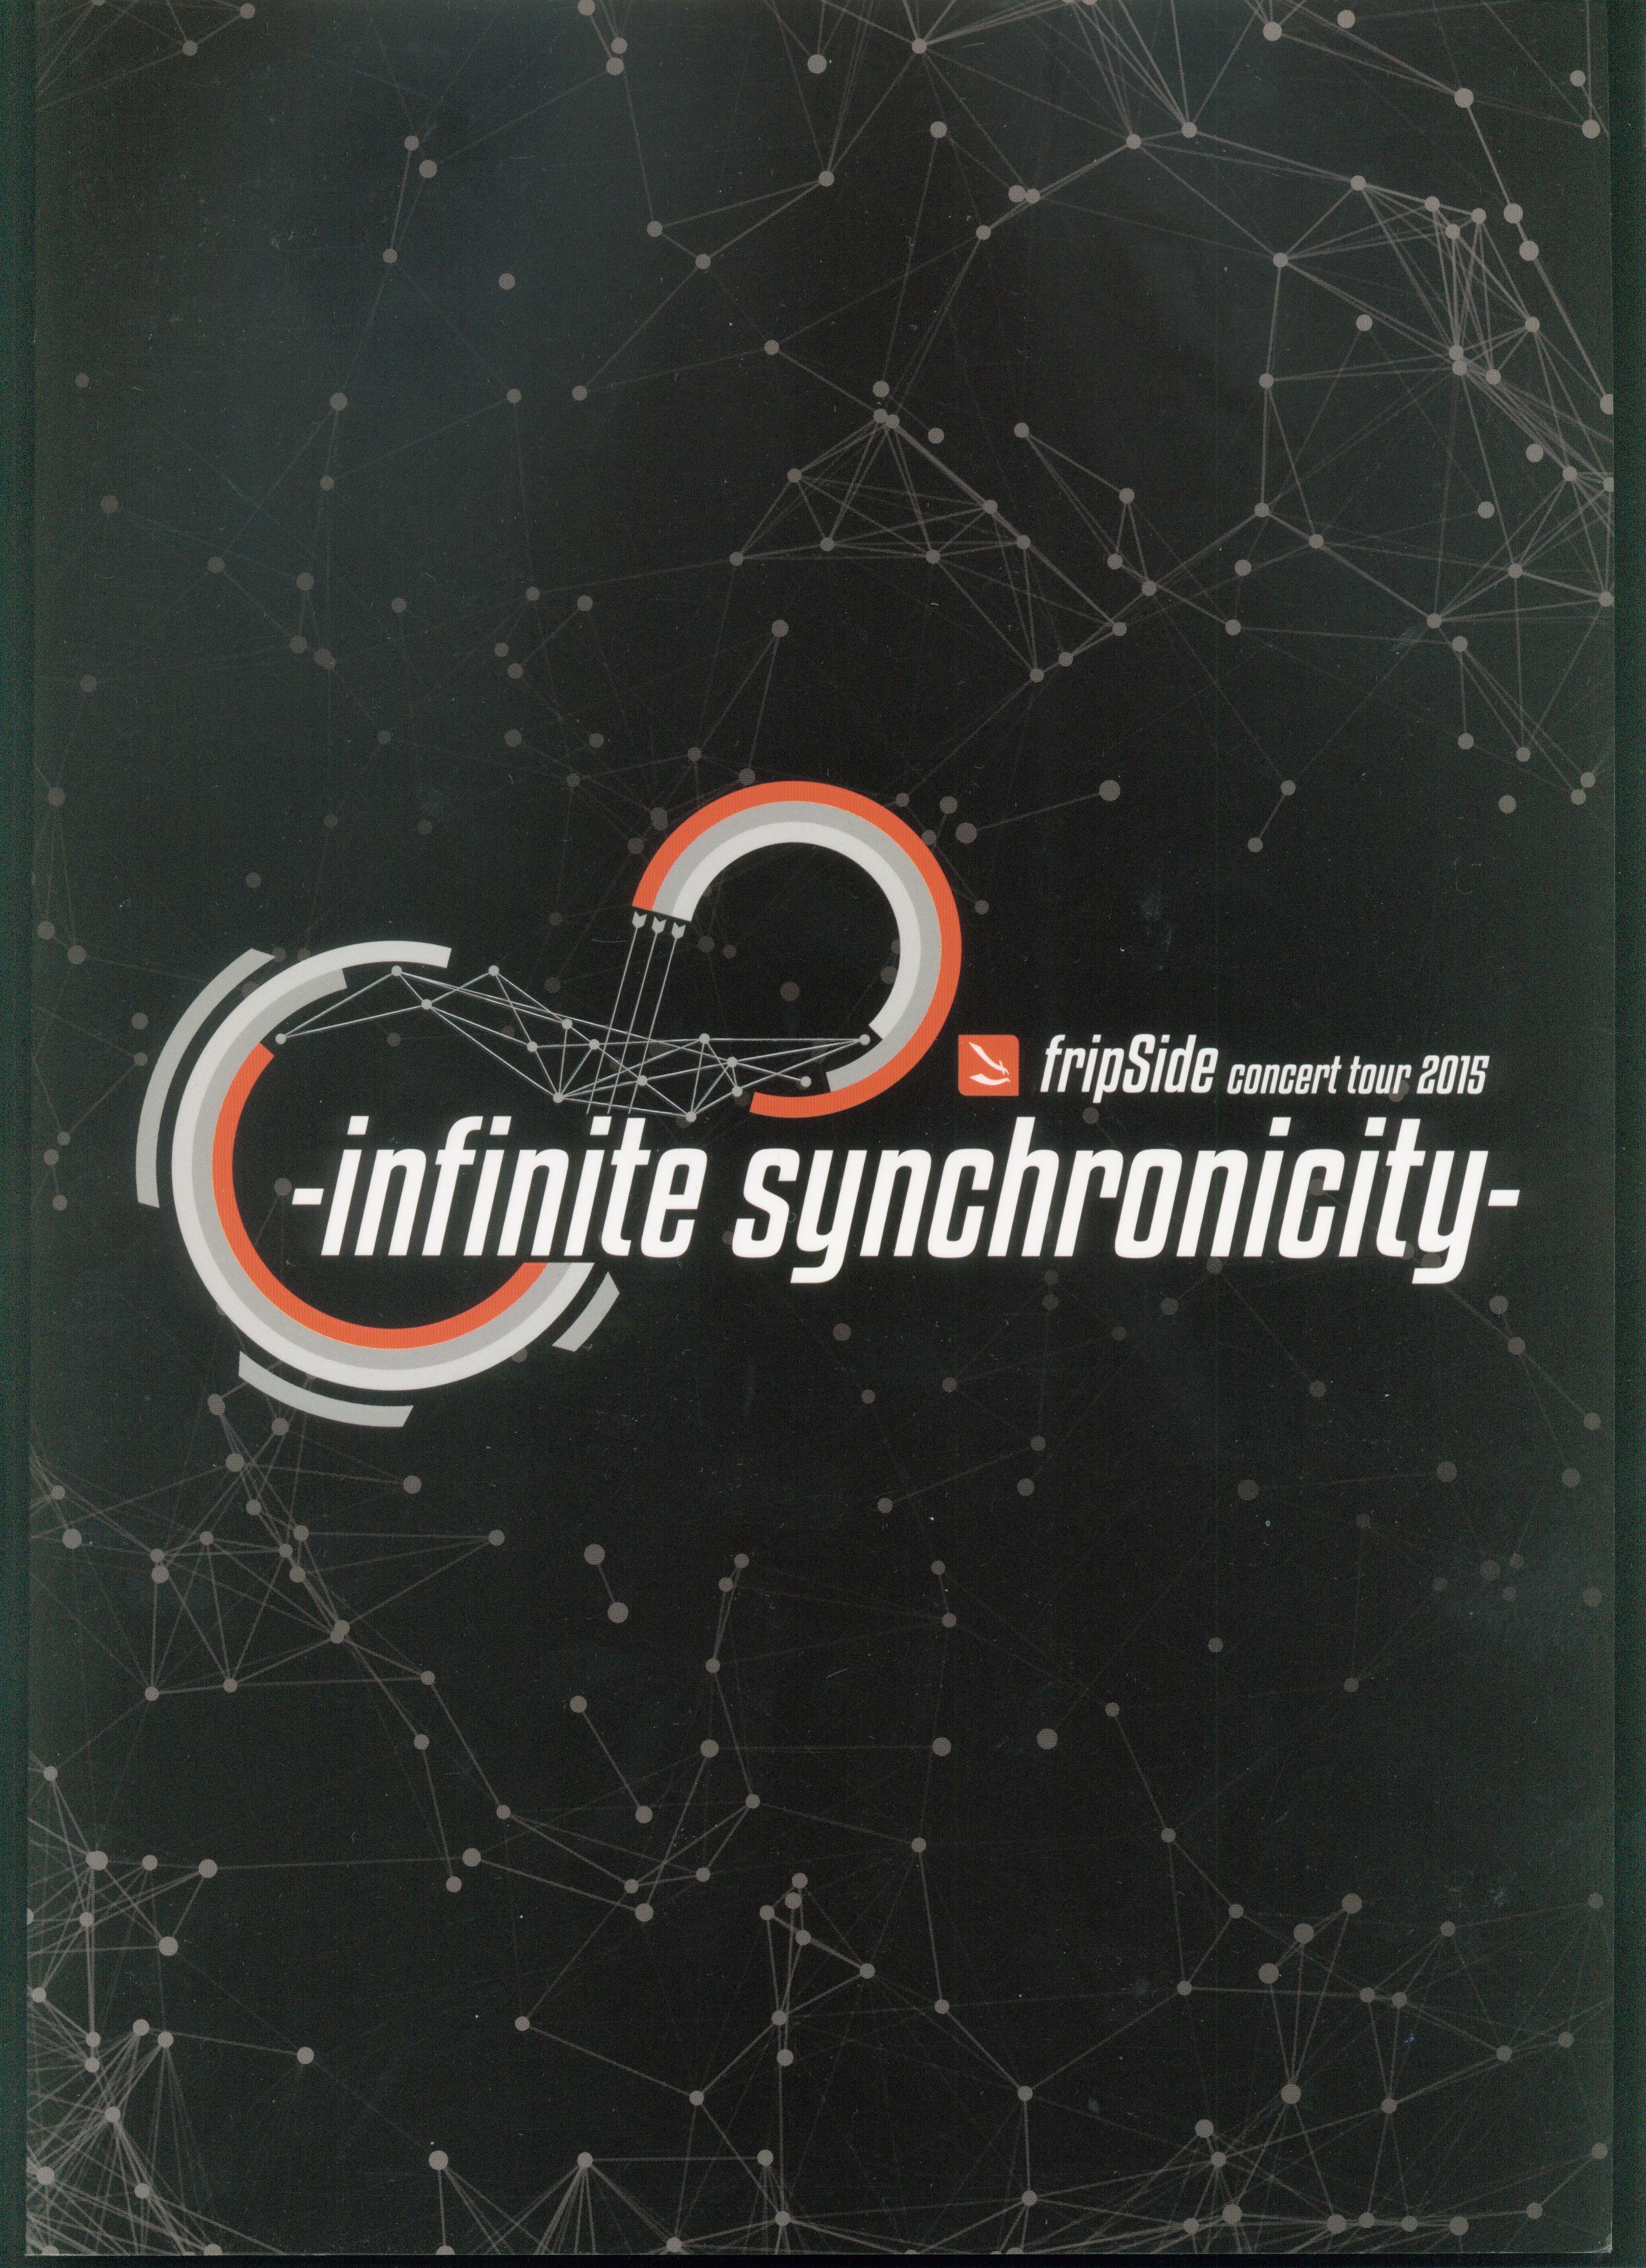 fripside concert tour 2015 infinite synchronicity